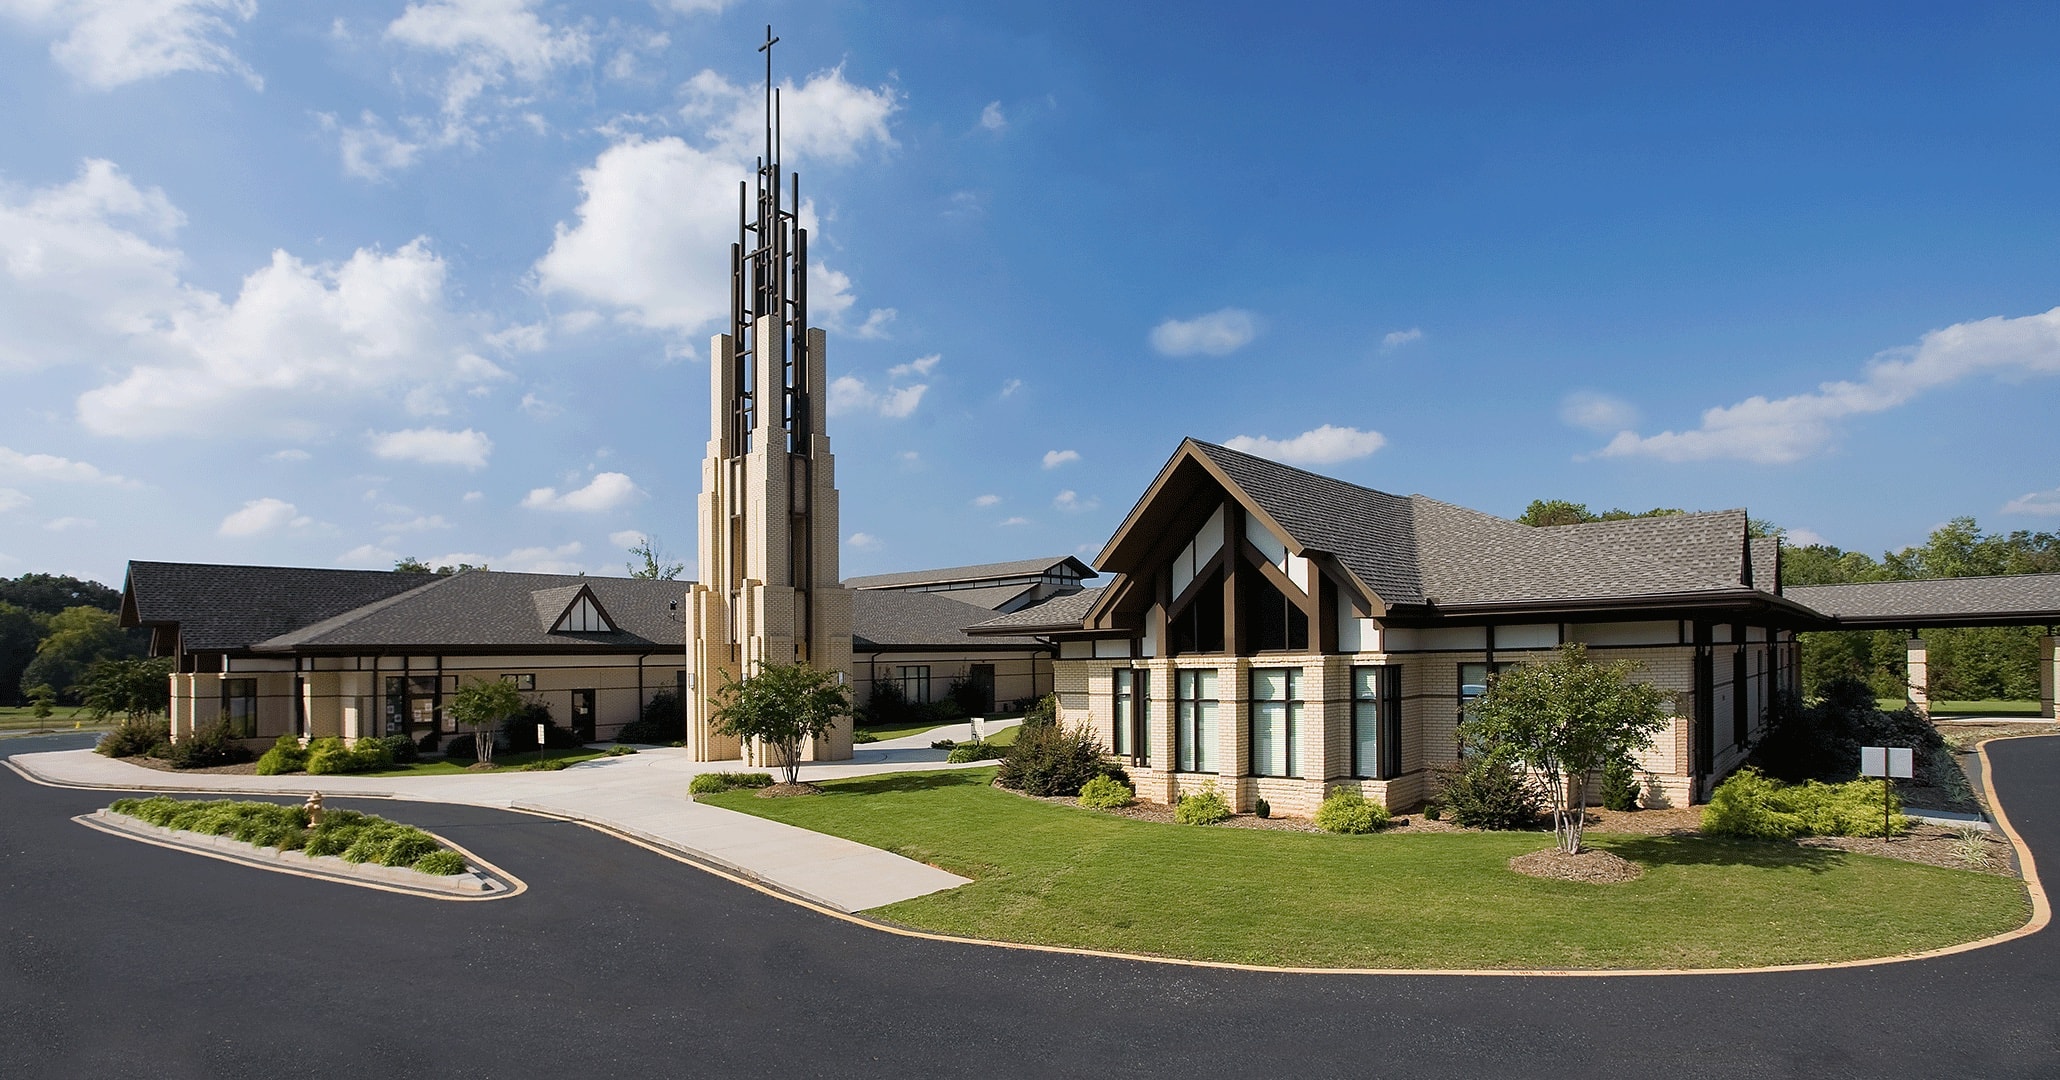 Clemson United Methodist Church worked with BOUDREAUX master planners to develop a master plan for their church campus